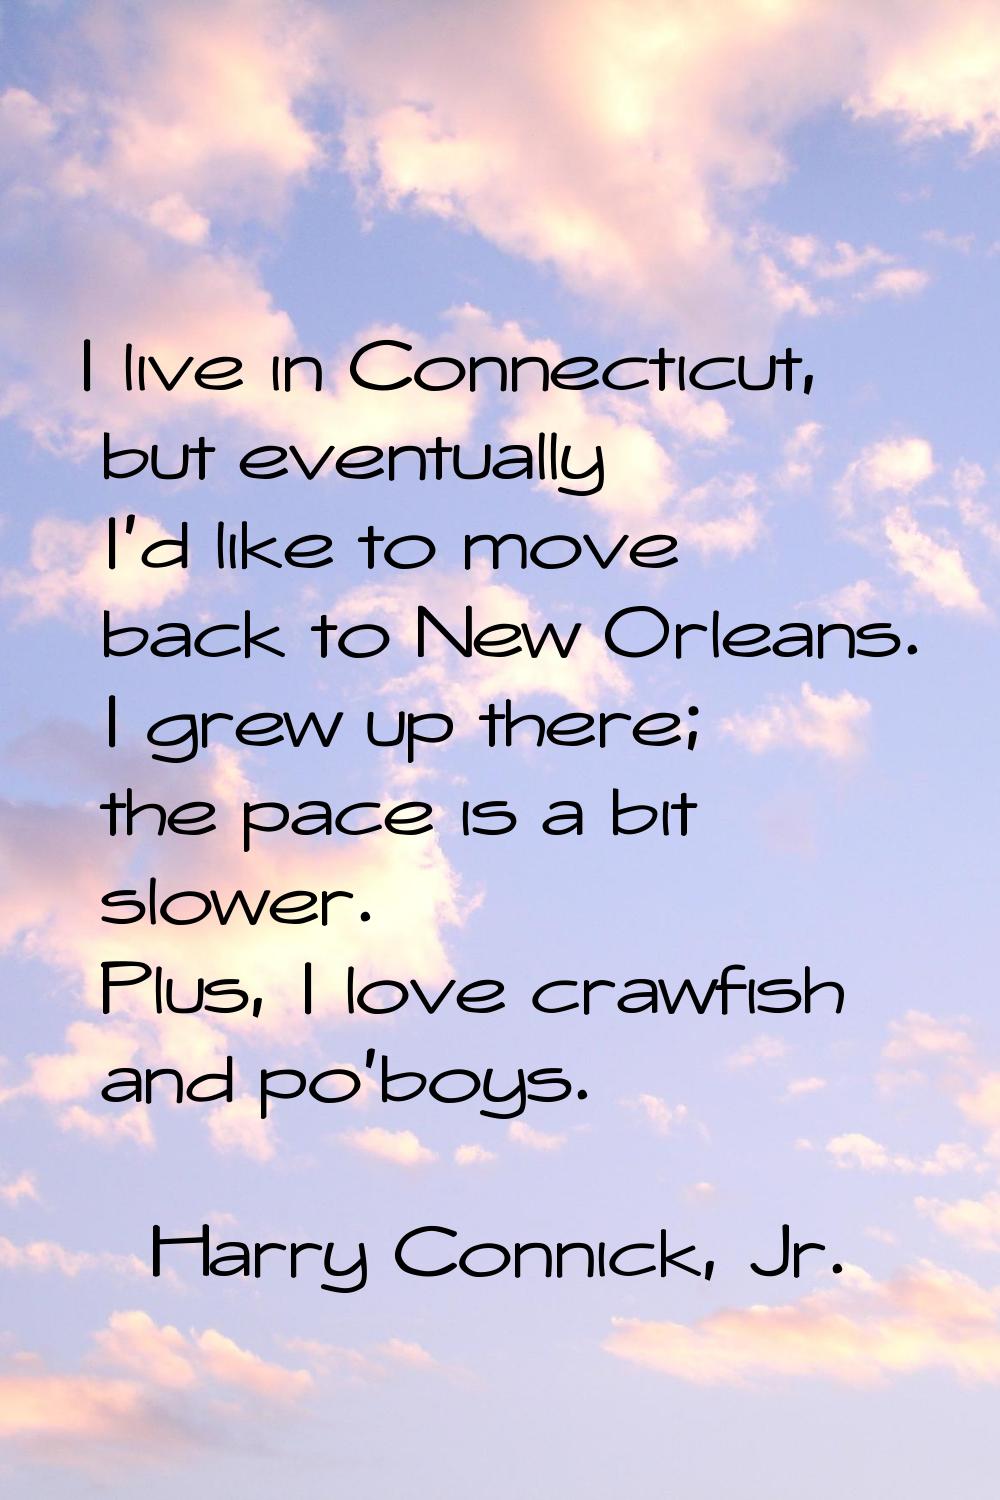 I live in Connecticut, but eventually I'd like to move back to New Orleans. I grew up there; the pa